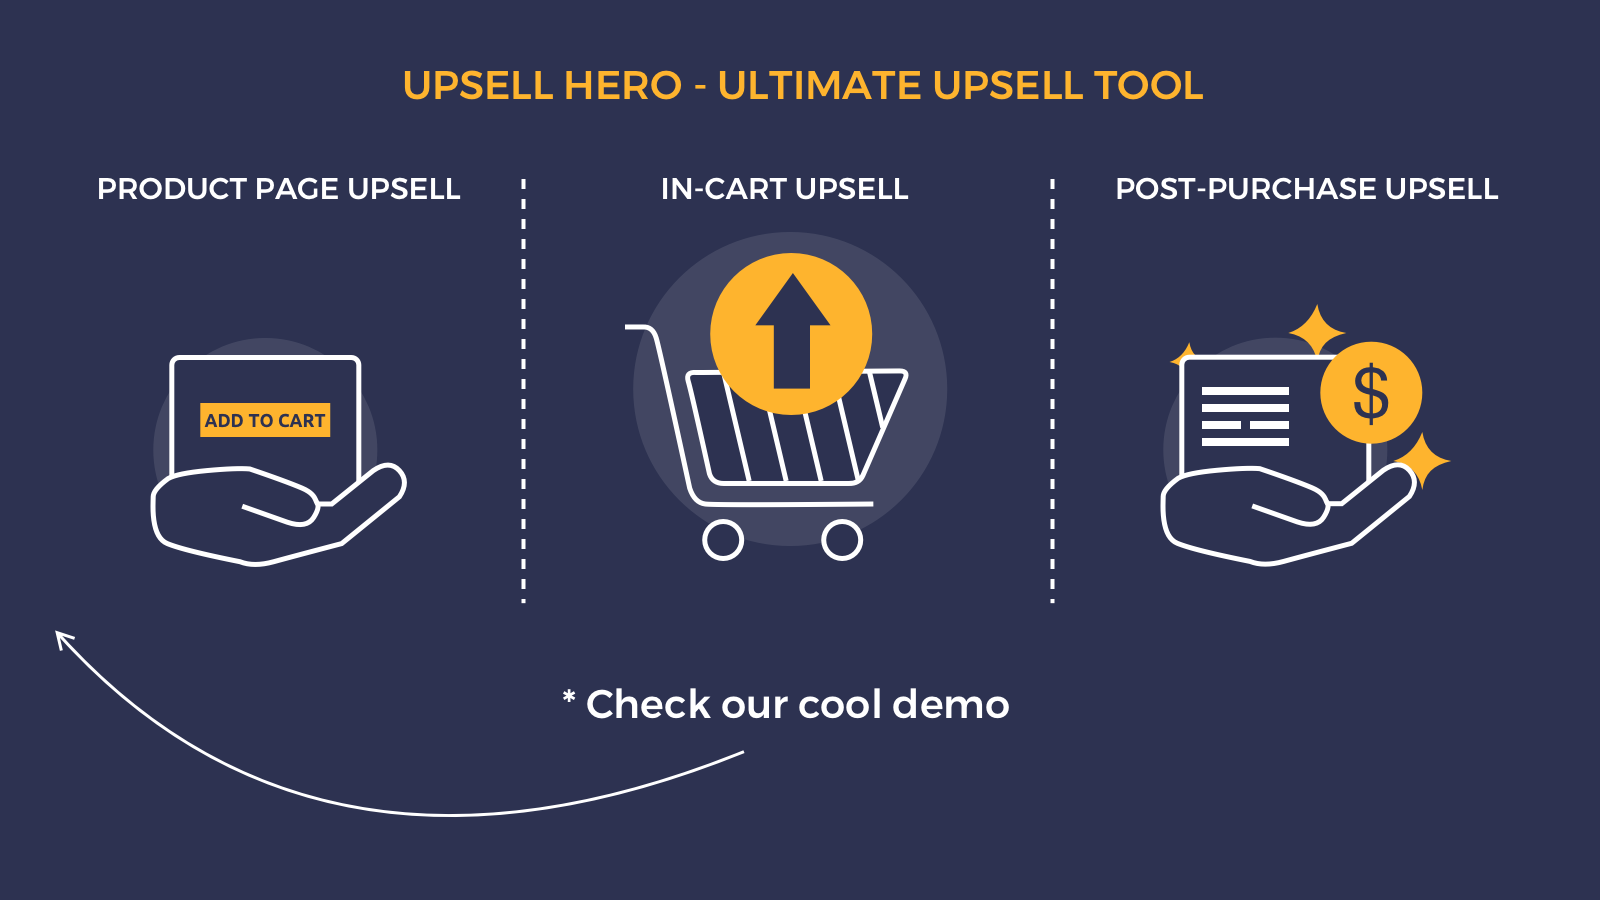 On cart upsell, add to cart popup post purchase one click upsell